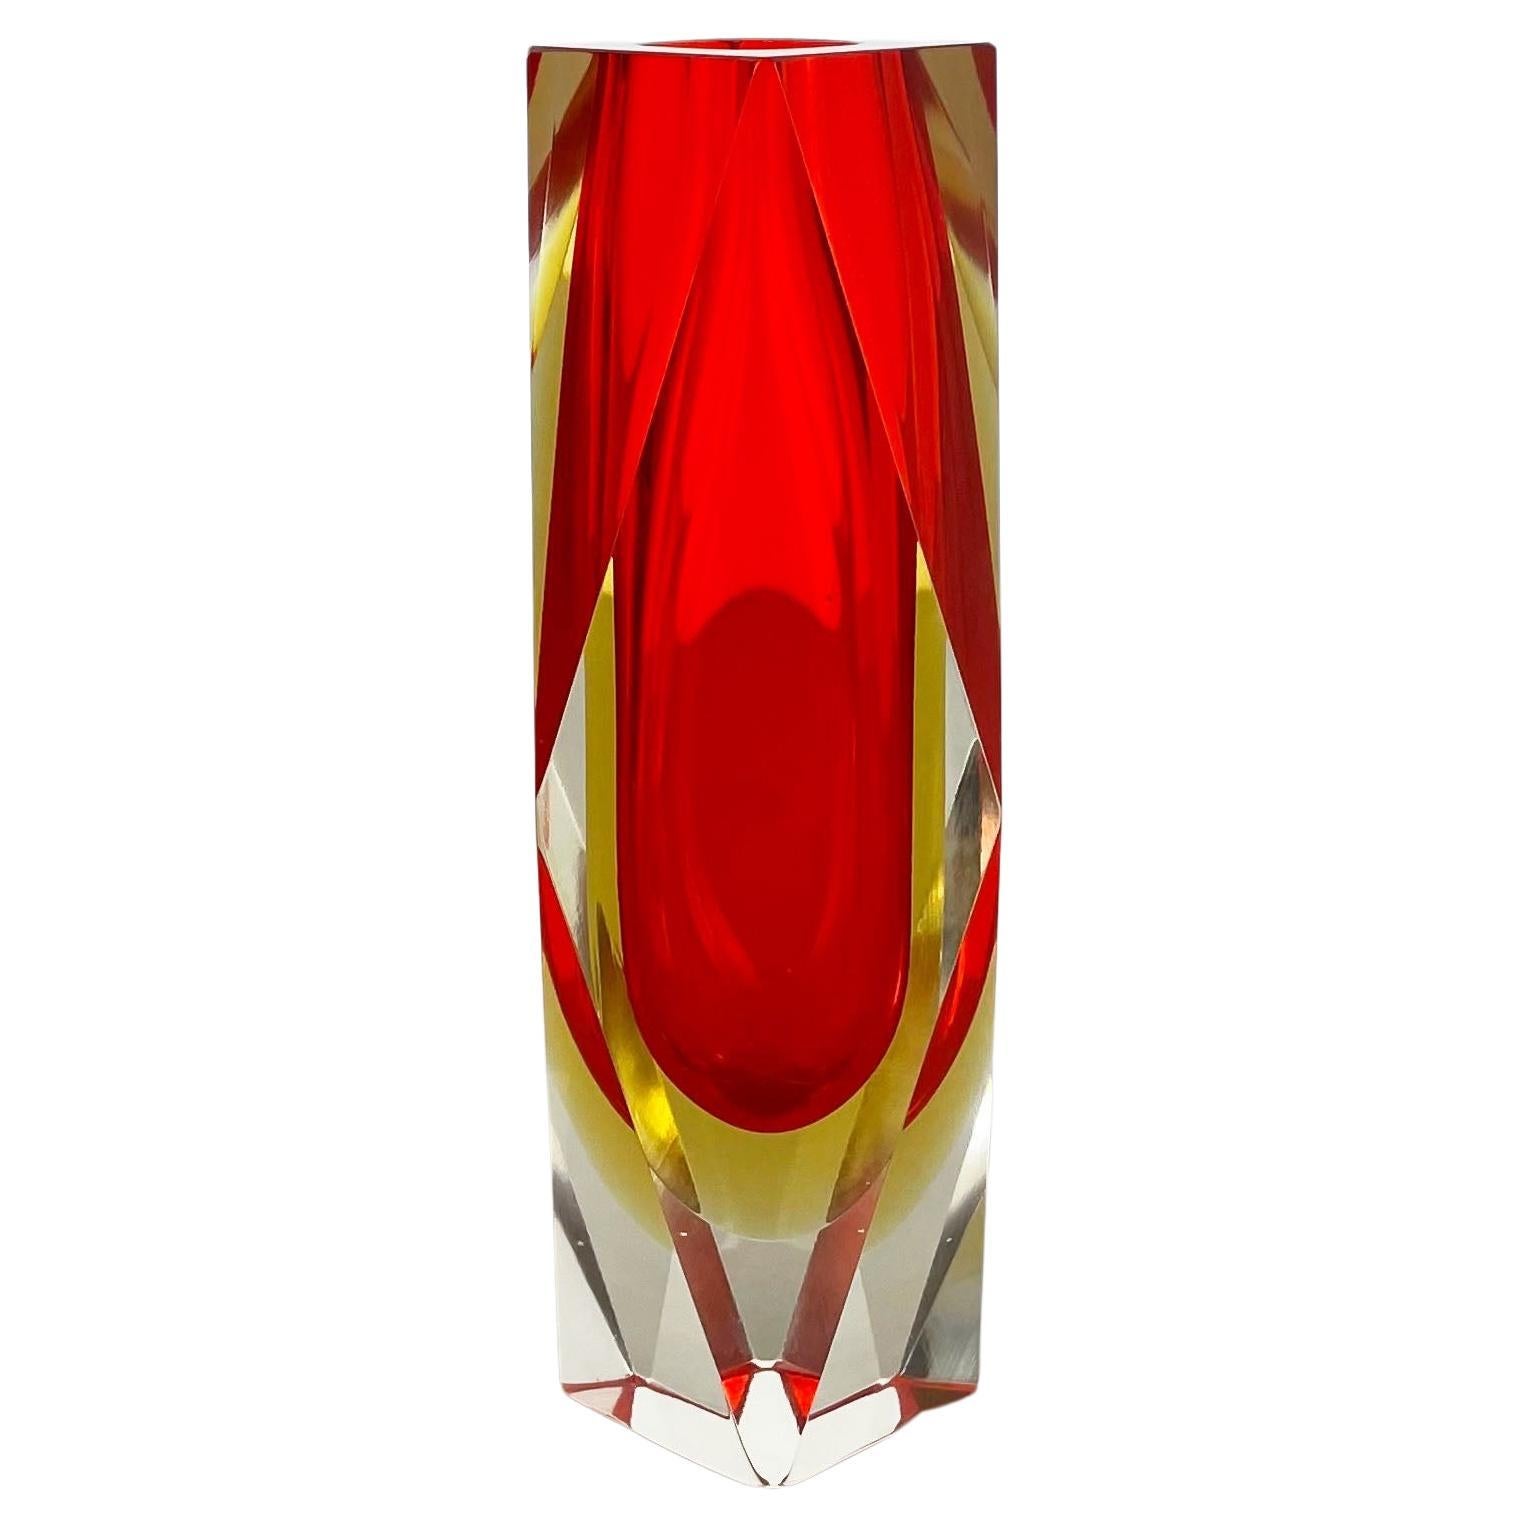 Large Red Murano Glass Sommerso Vase by Flavio Poli Attributed, Italy 1970s